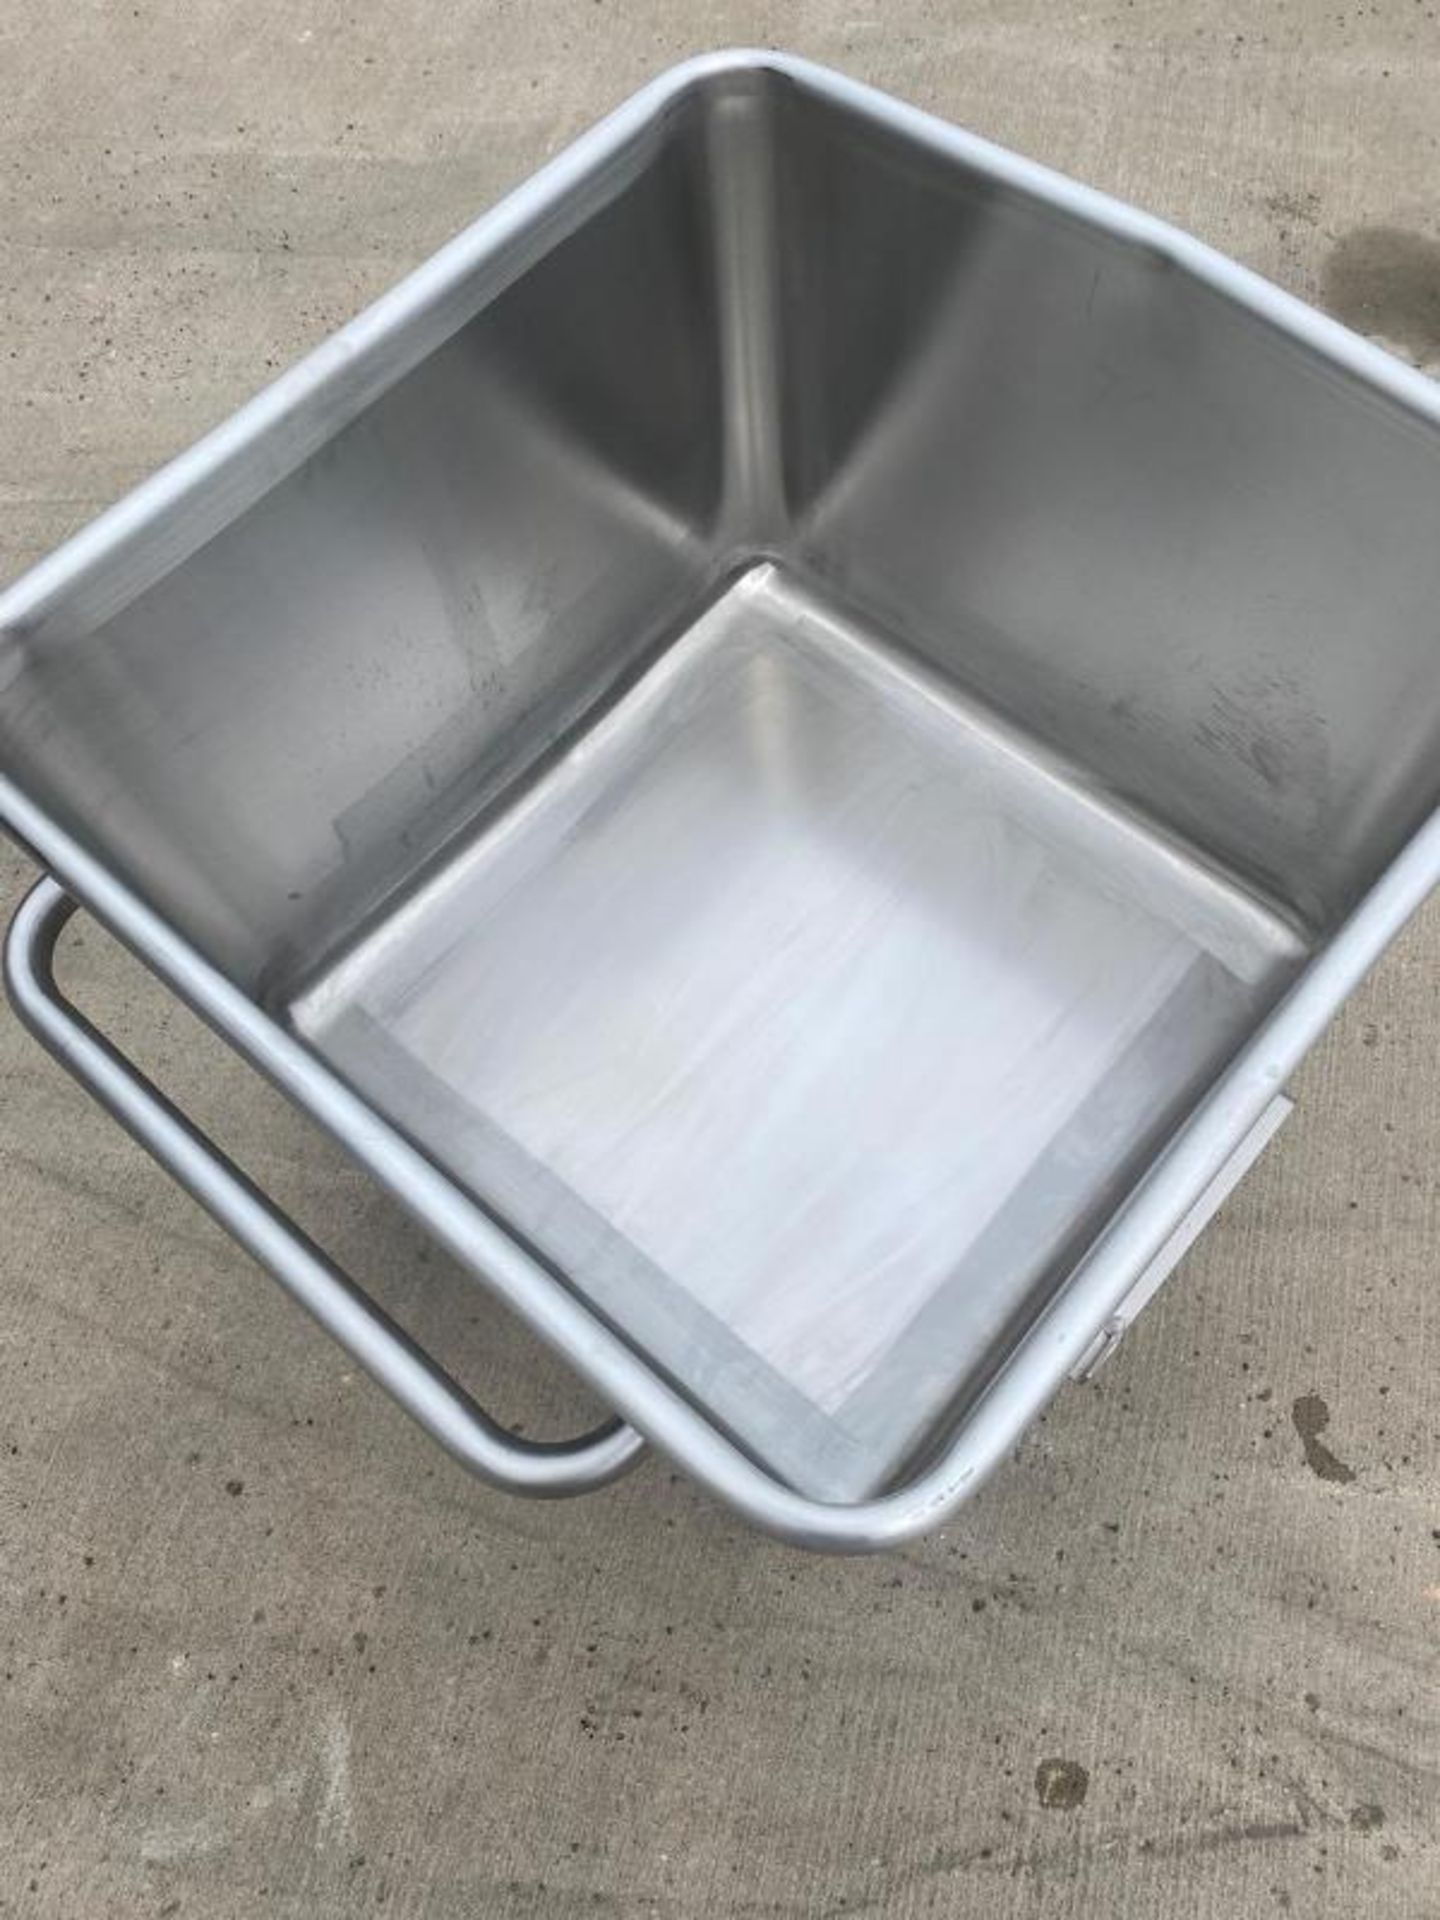 Stainless Steel Dump Buggies, 400 Lb. capacity with handle, new, never used, Located in Sandwich, IL - Image 4 of 4